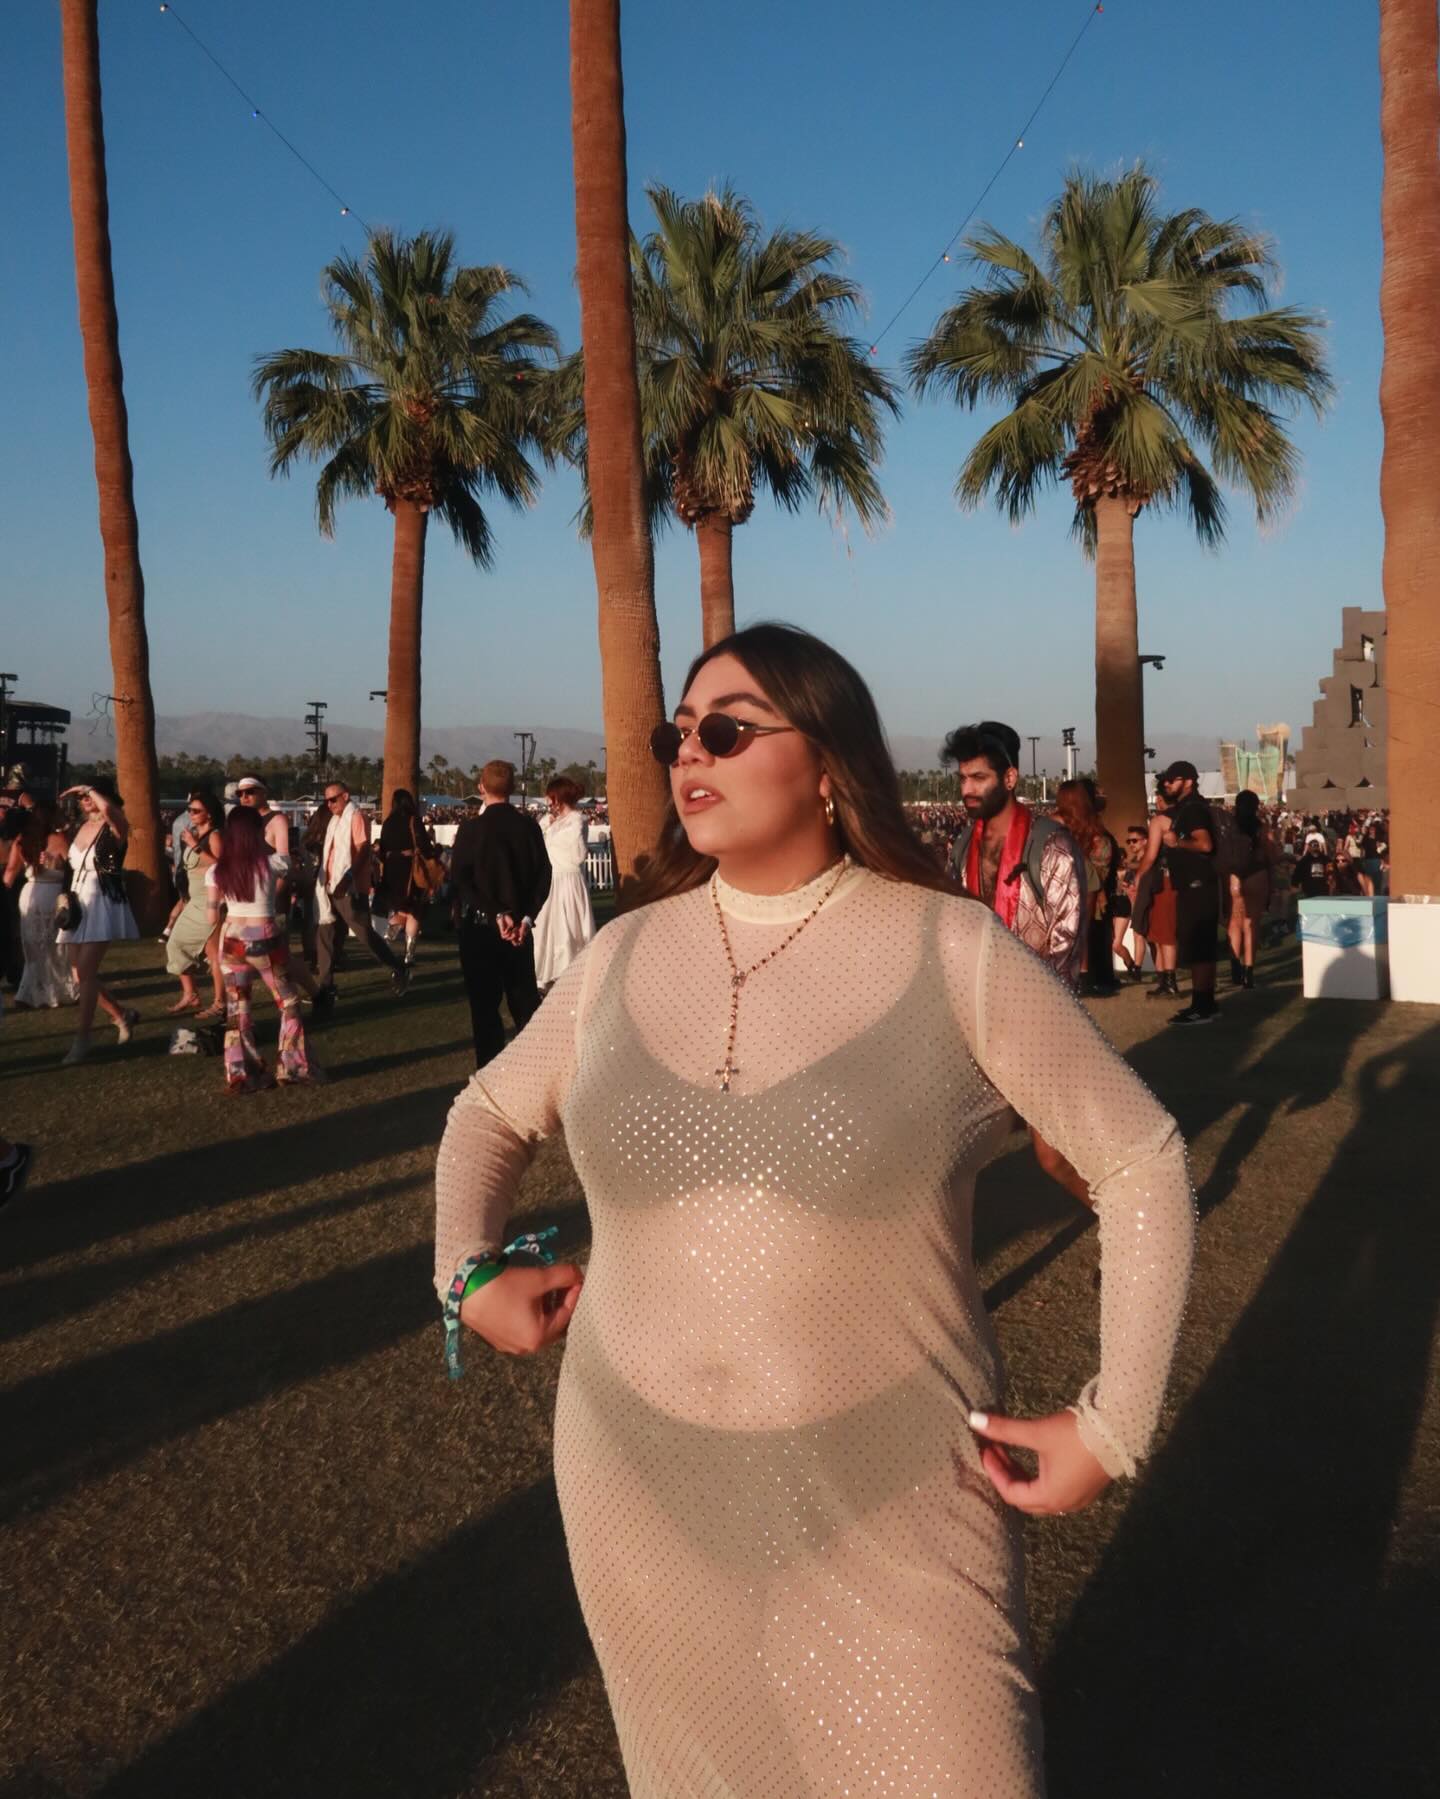 Influencer at Coachella wearing bedazzled sheer dress with black bra, black underwear, and round sunglasses.